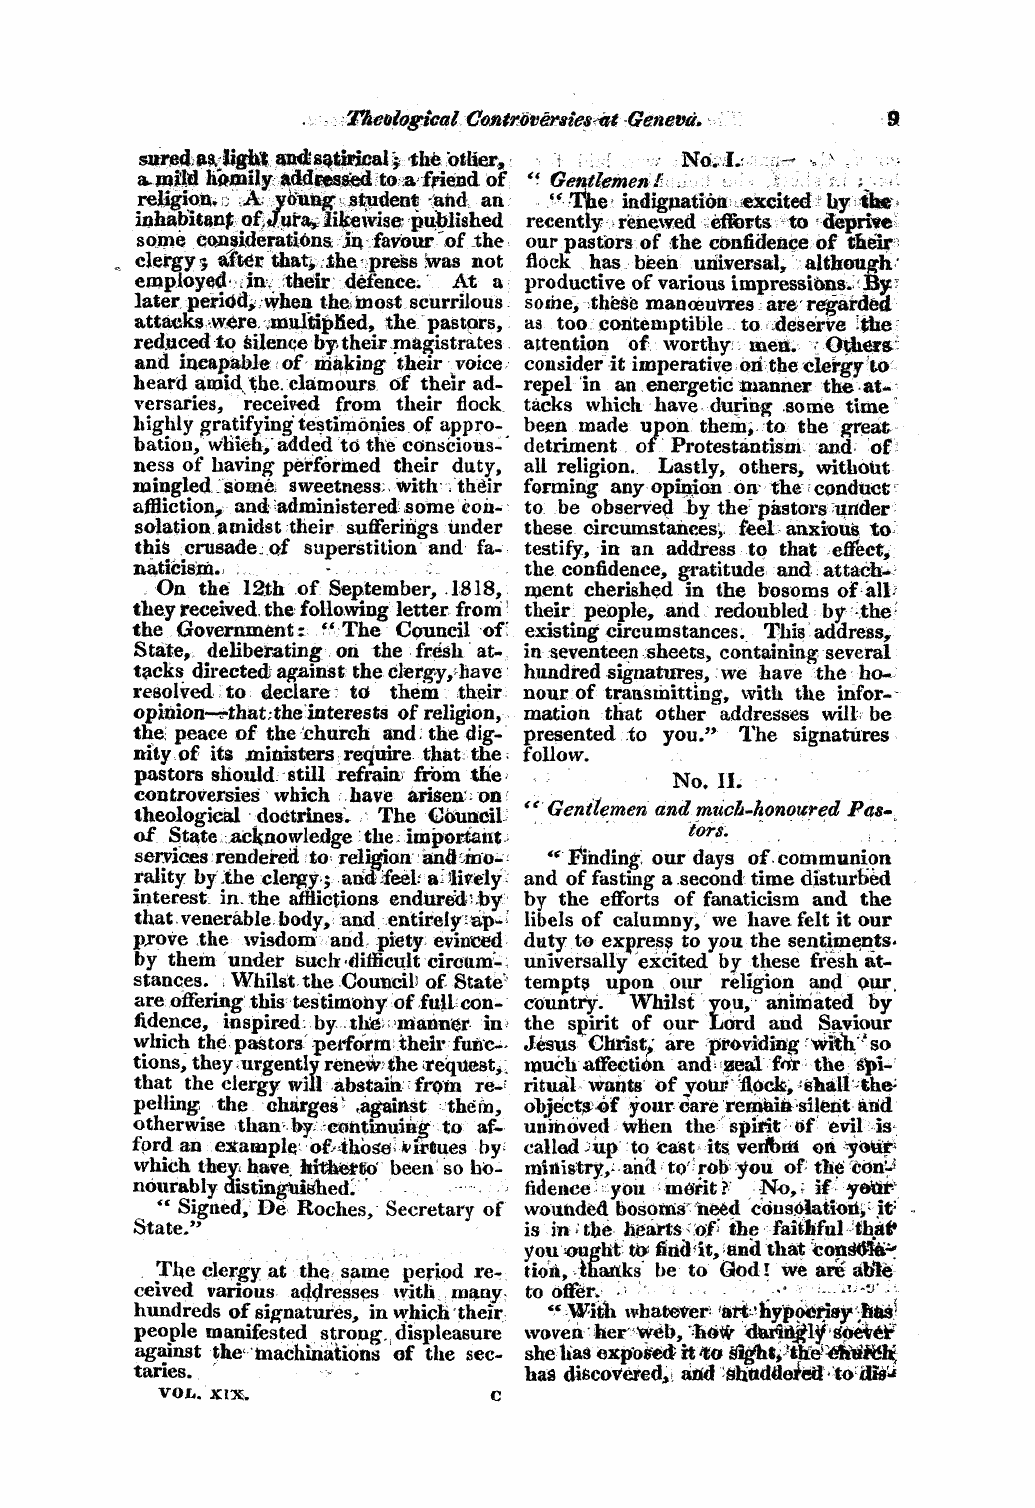 Monthly Repository (1806-1838) and Unitarian Chronicle (1832-1833): F Y, 1st edition - Untitled Article